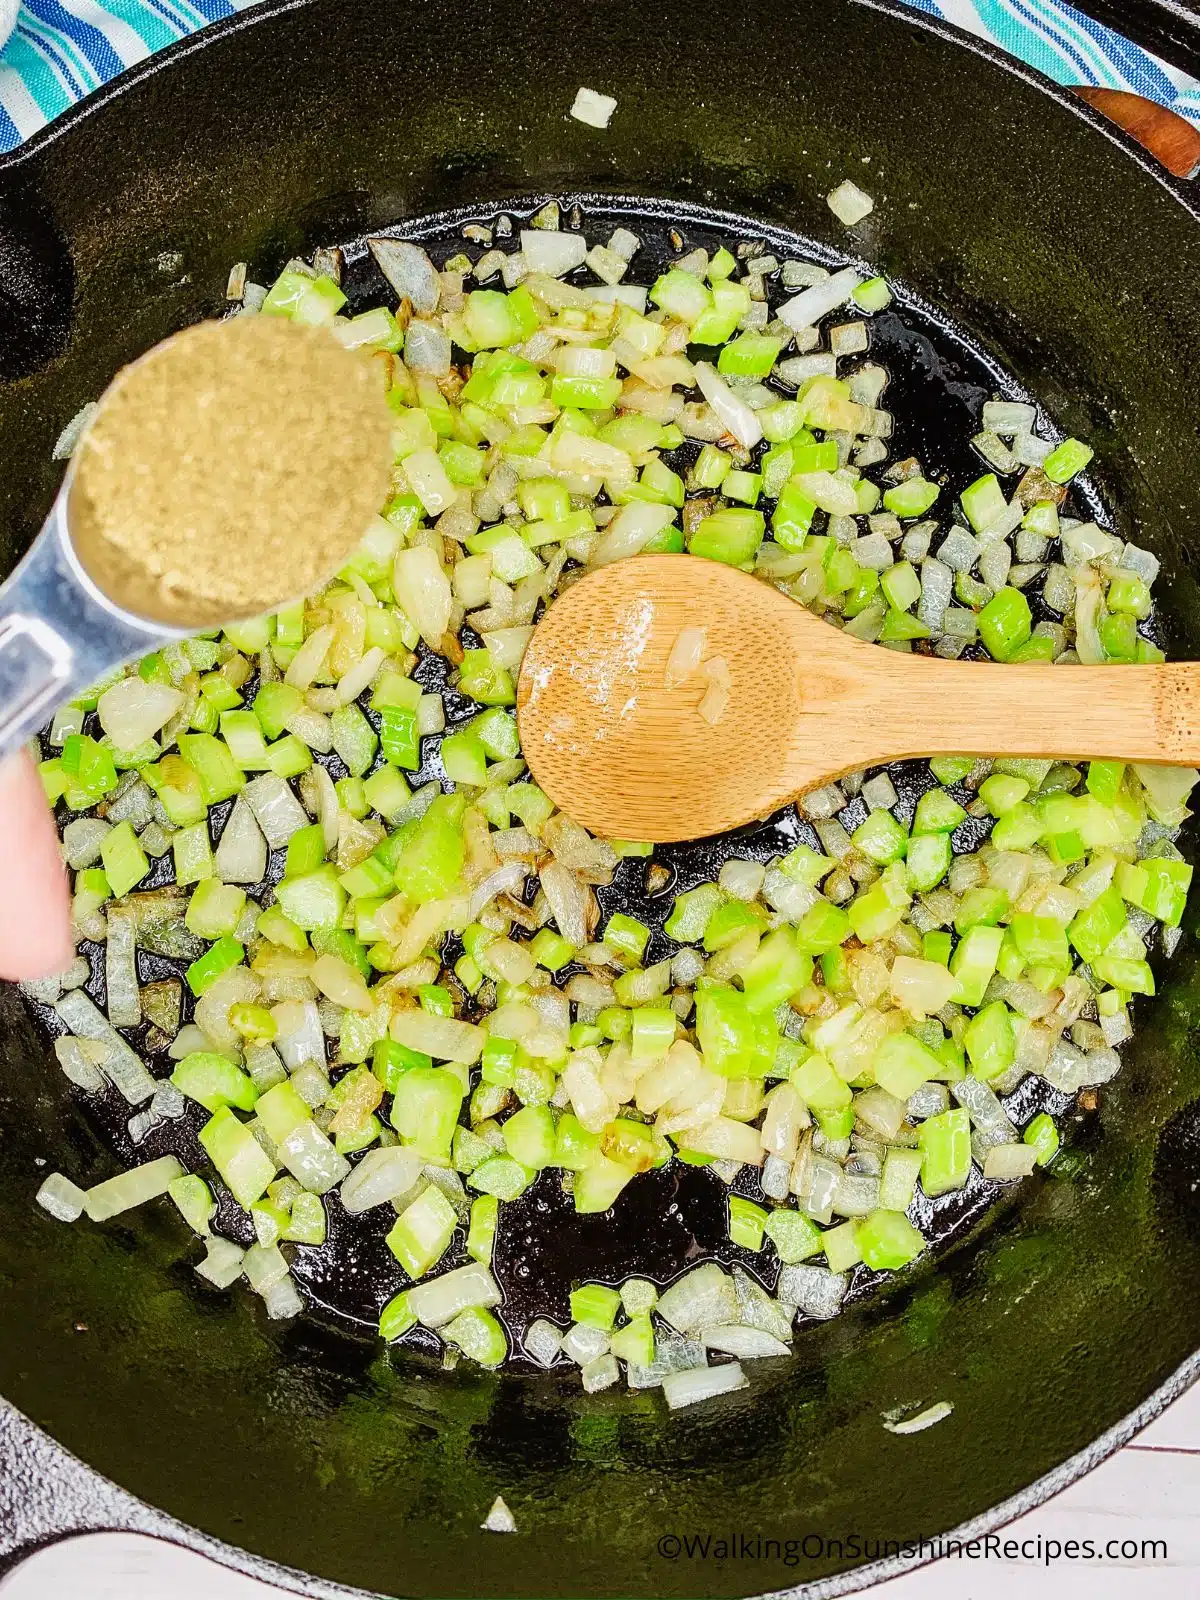 Add poultry seasoning to cast iron skillet with onions and celery.